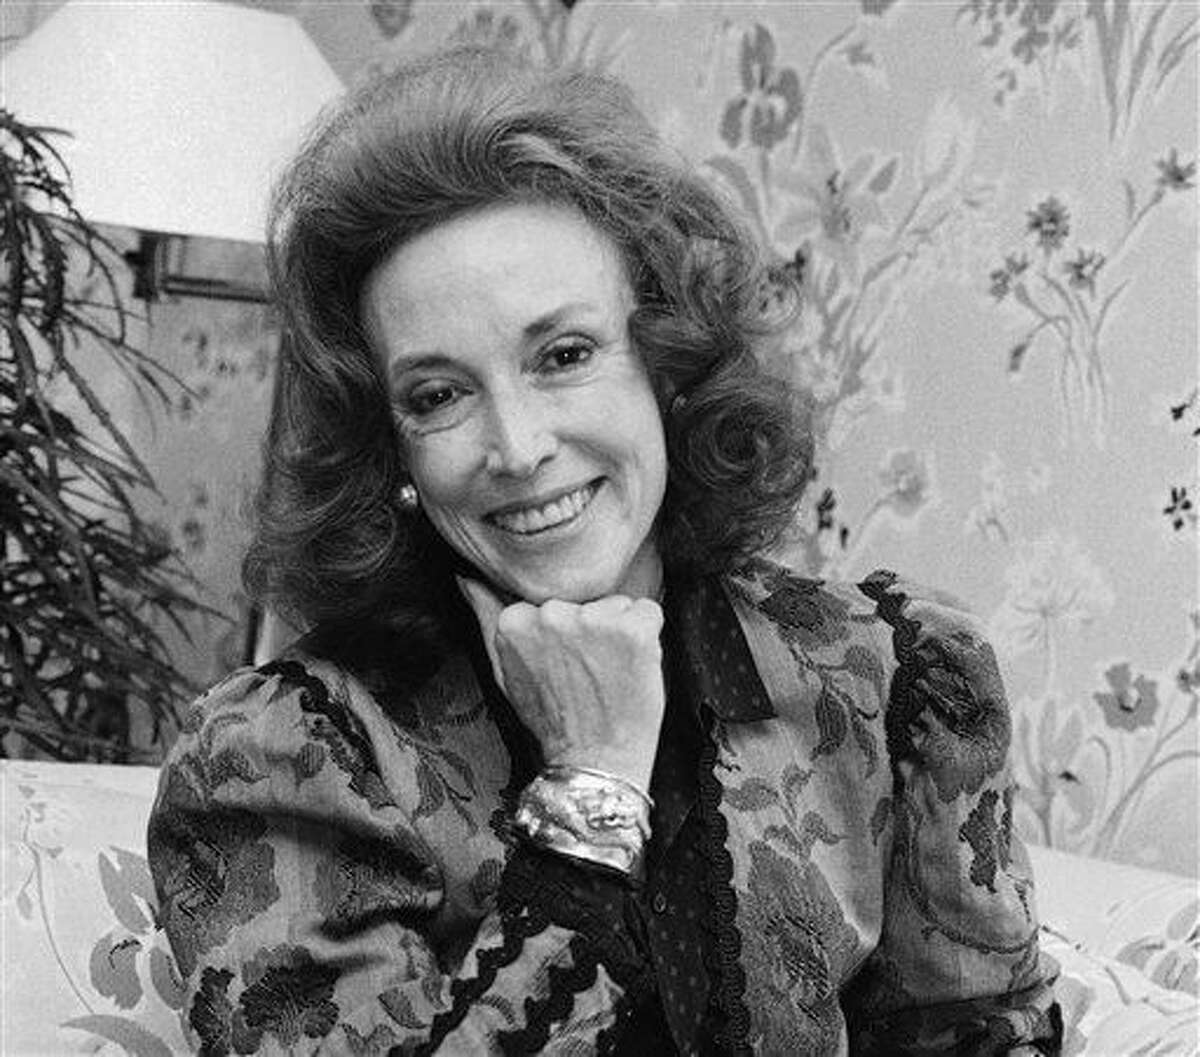 Helen Gurley Brown, the Longtime Cosmo Editor, Was the Original Carrie Bradshaw